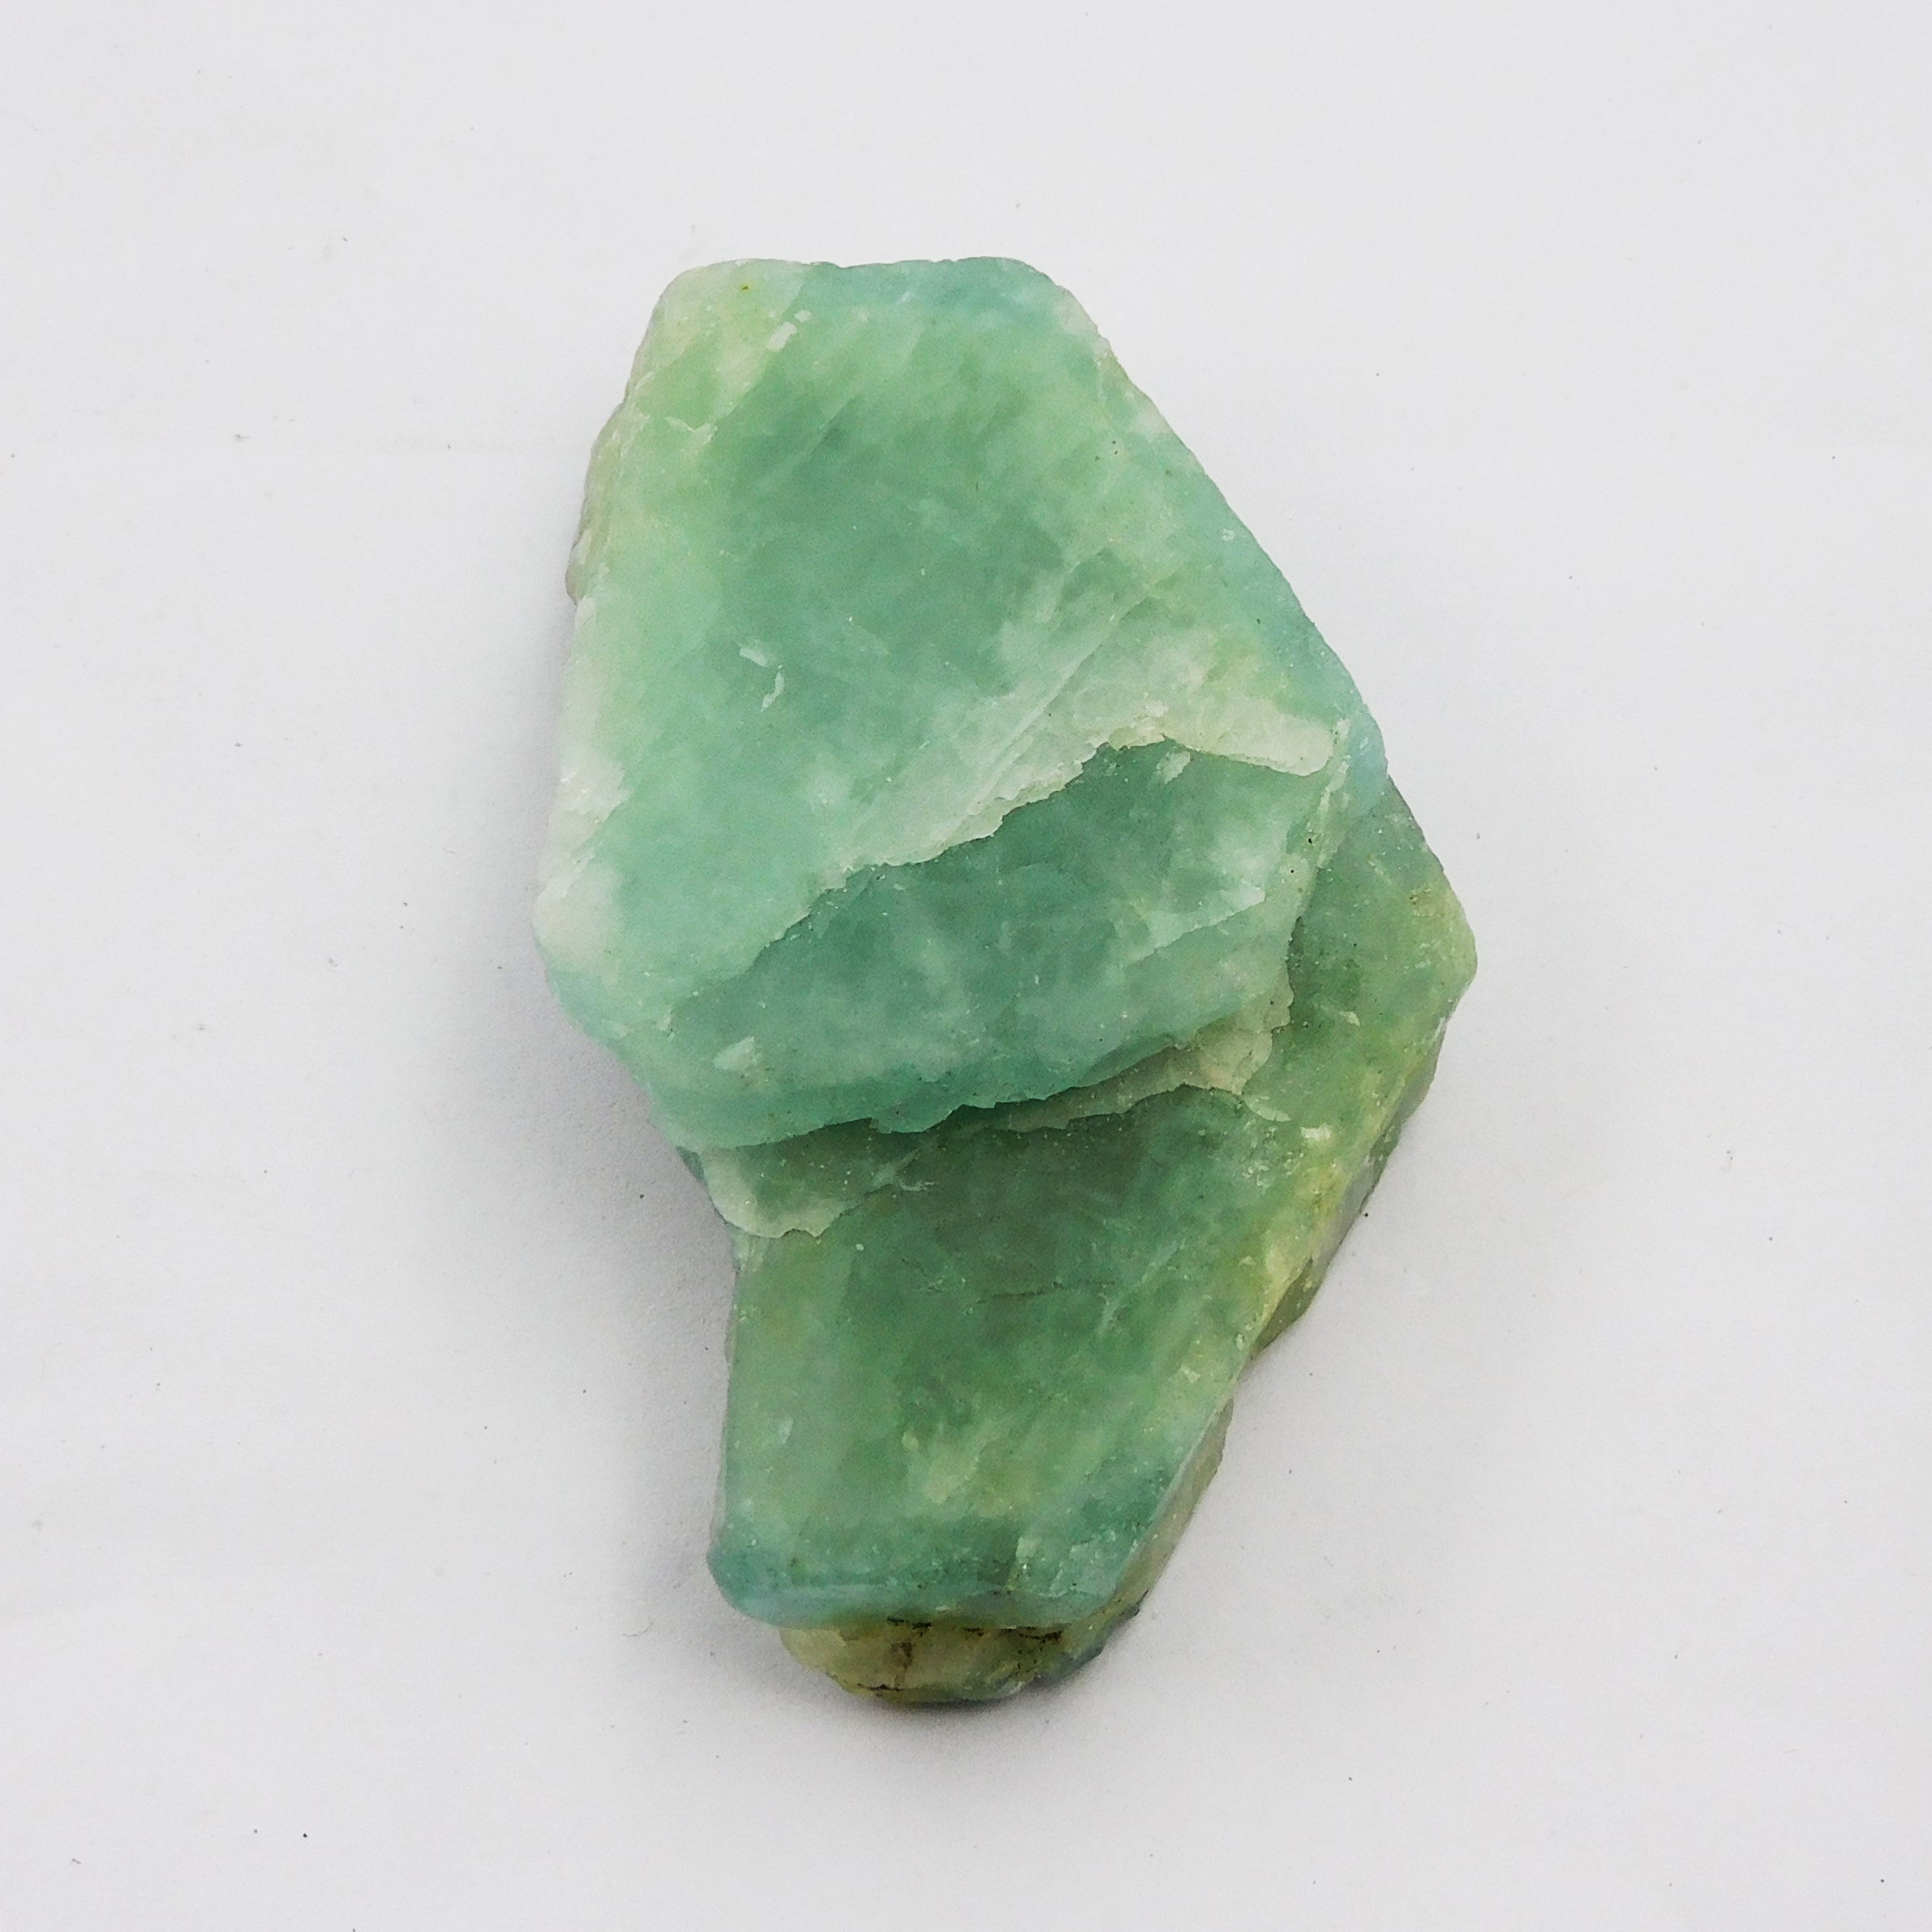 World Best Aquamarine 100% Natural Uncut Earth Mined Raw Rough 386 Carat Earth Mind Certified Natural Aquamarine Loose Gemstone Free Shipping Free Delivery